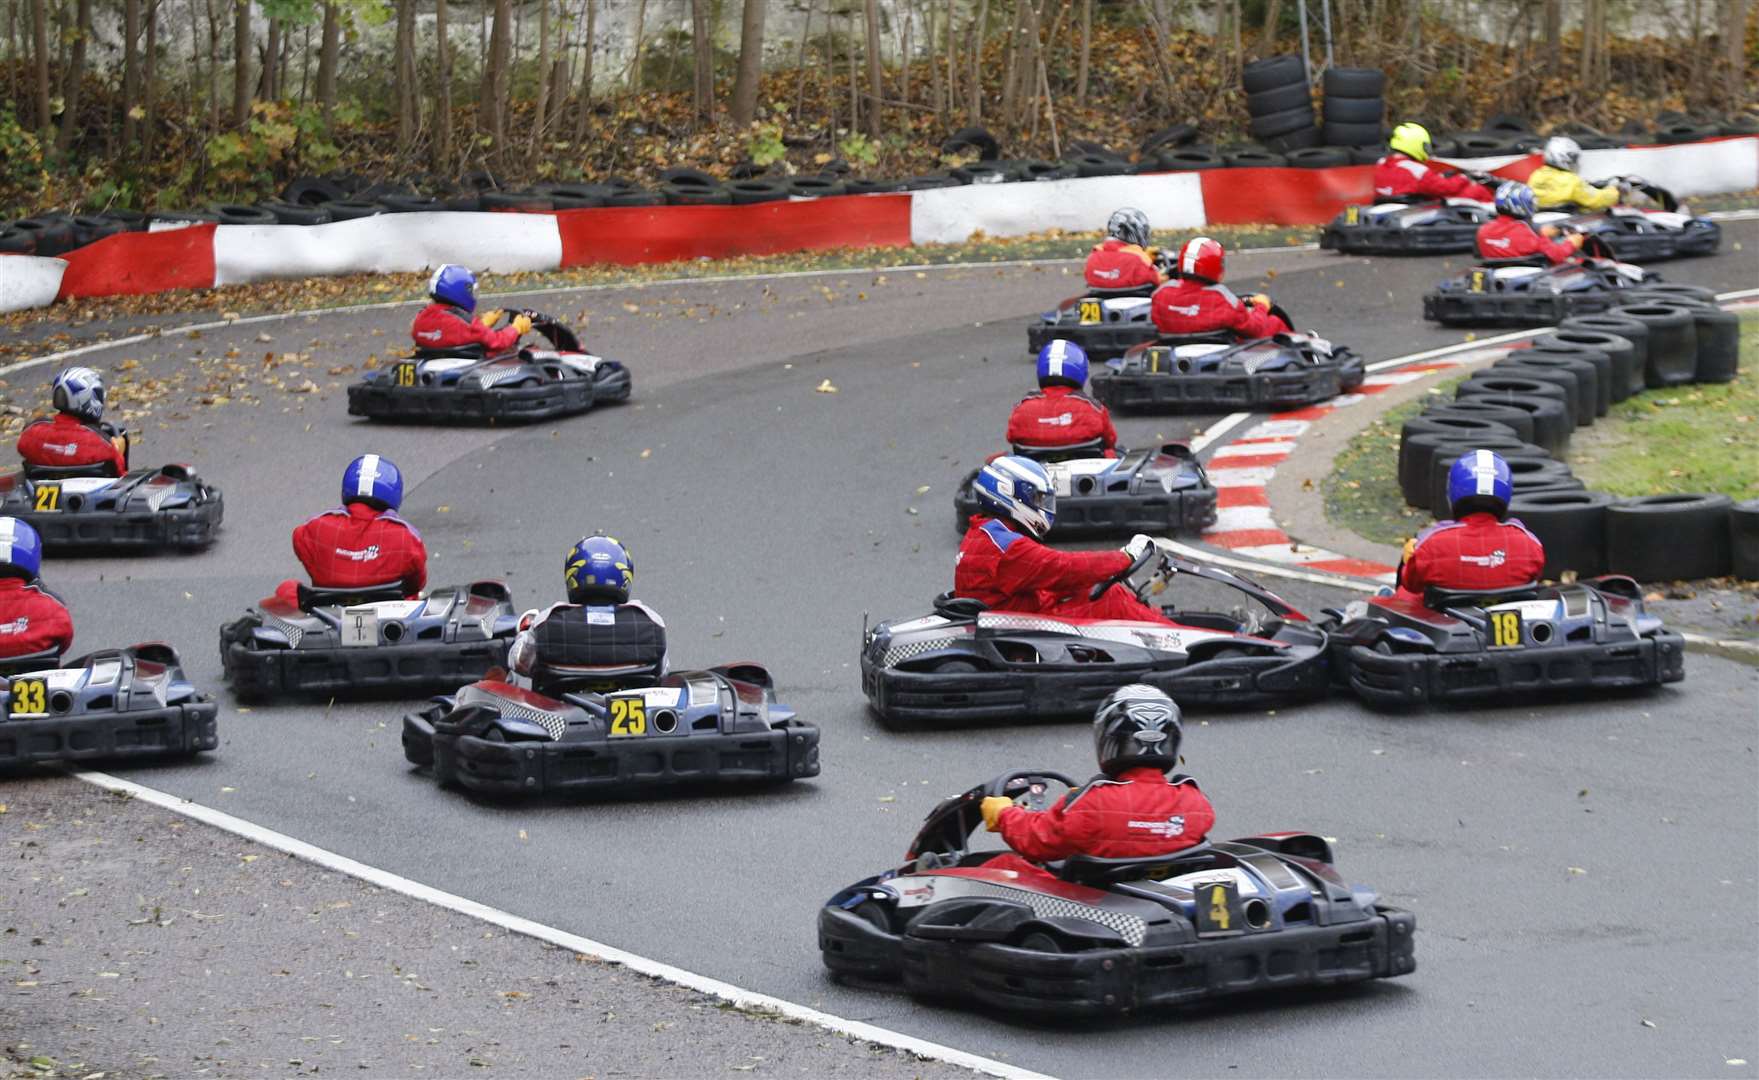 Sisley invented outdoor corporate karting and it became very popular at Buckmore